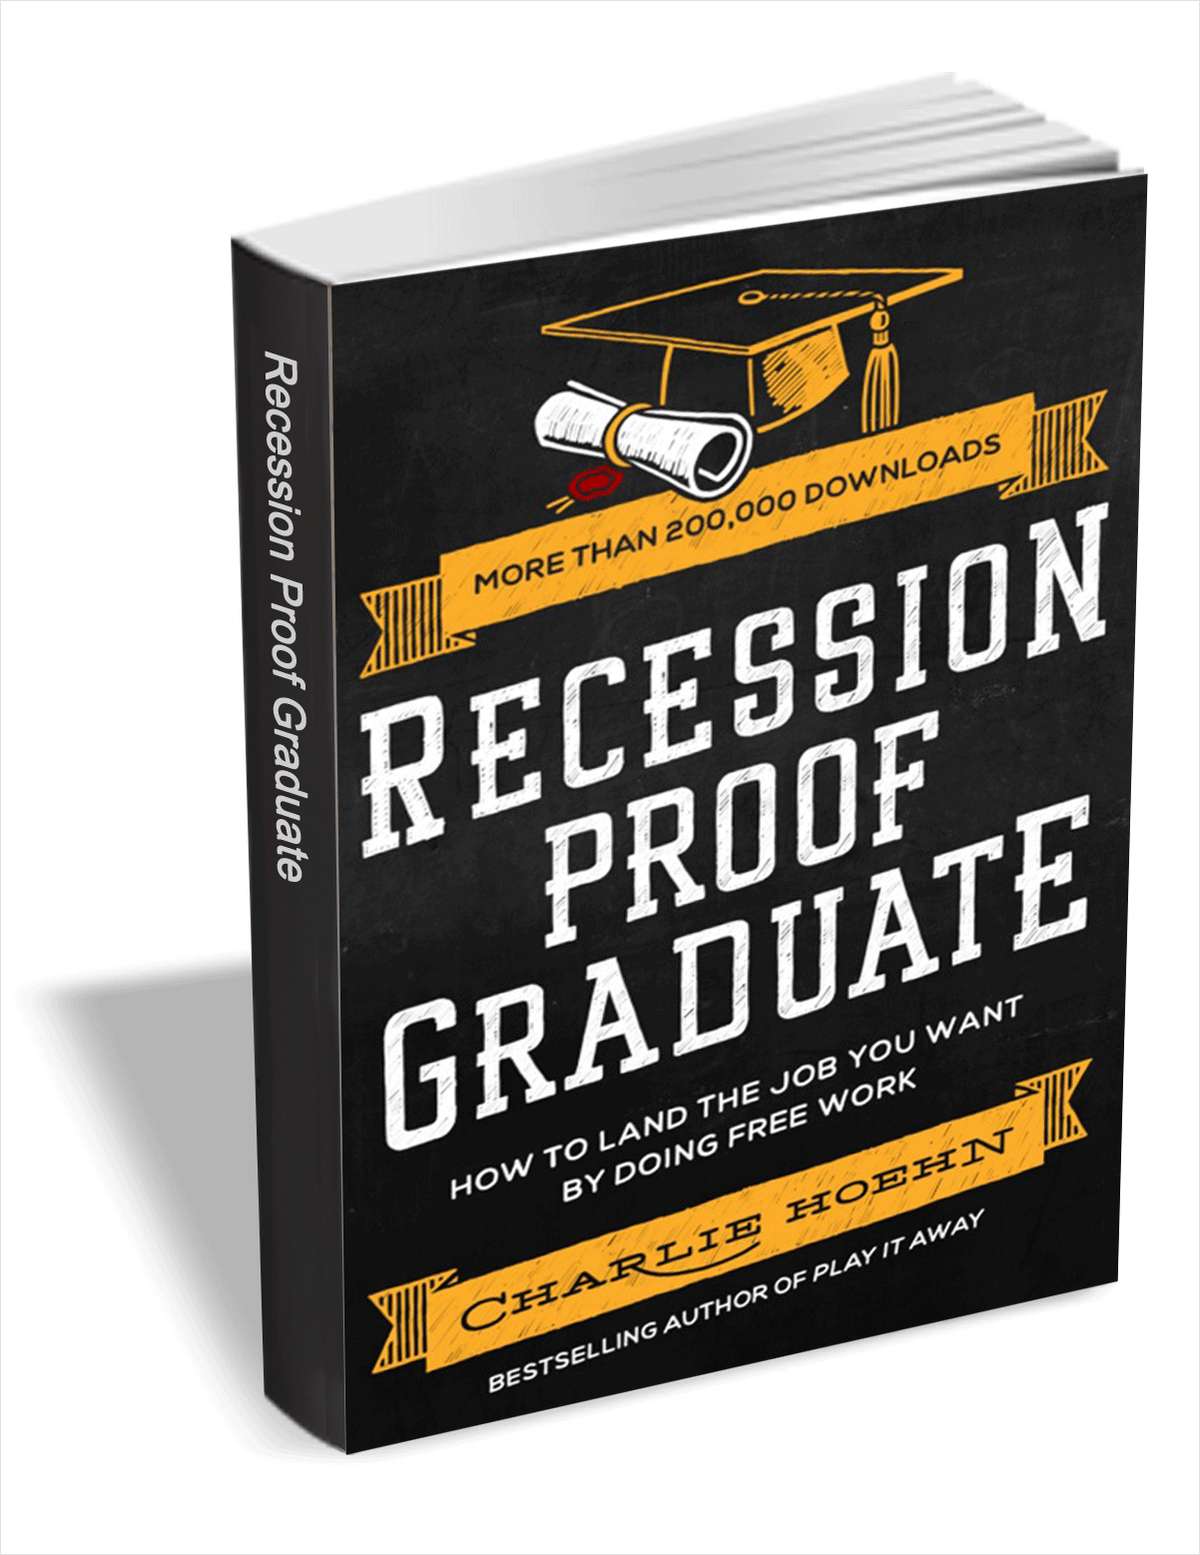 Recession Proof Graduate - How to Land the Job You Want by Doing Free Work